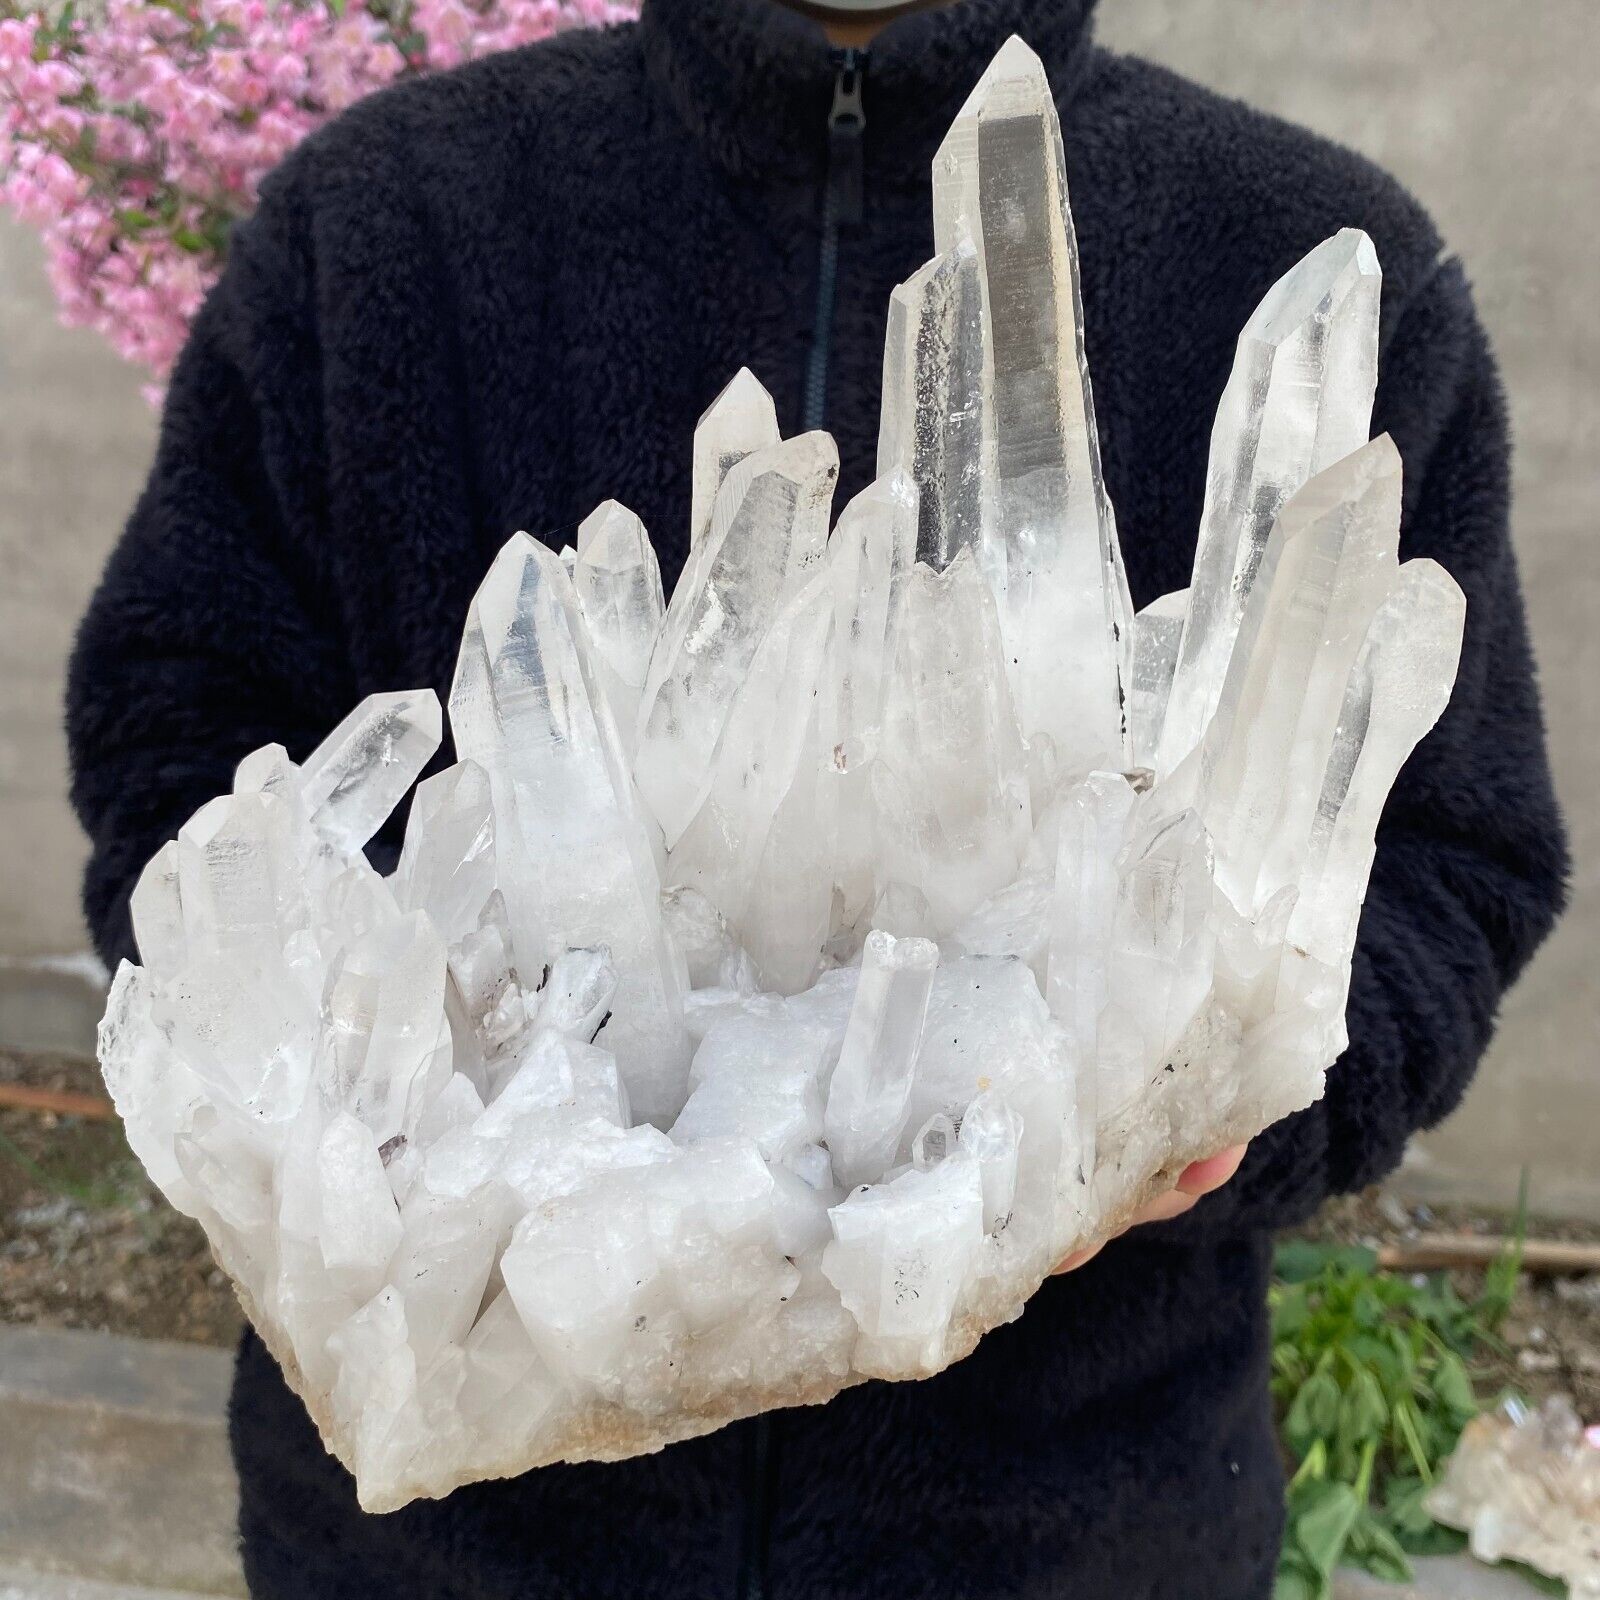 7.2lb A+++Large Natural clear white Crystal Himalayan quartz cluster /mineralsls